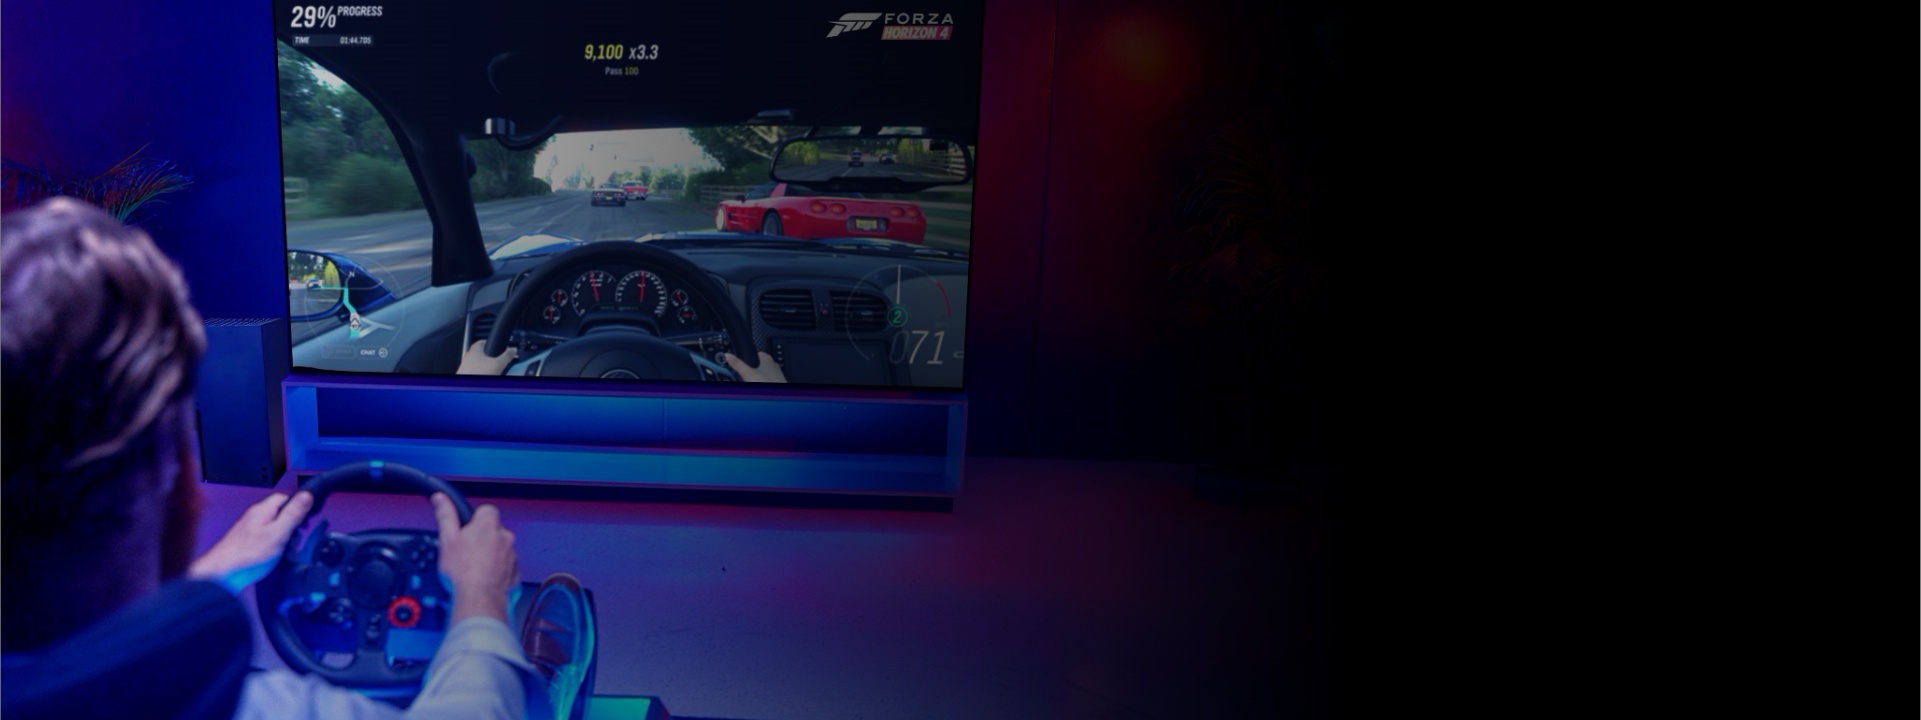 forza 6 and xbox setup with LG